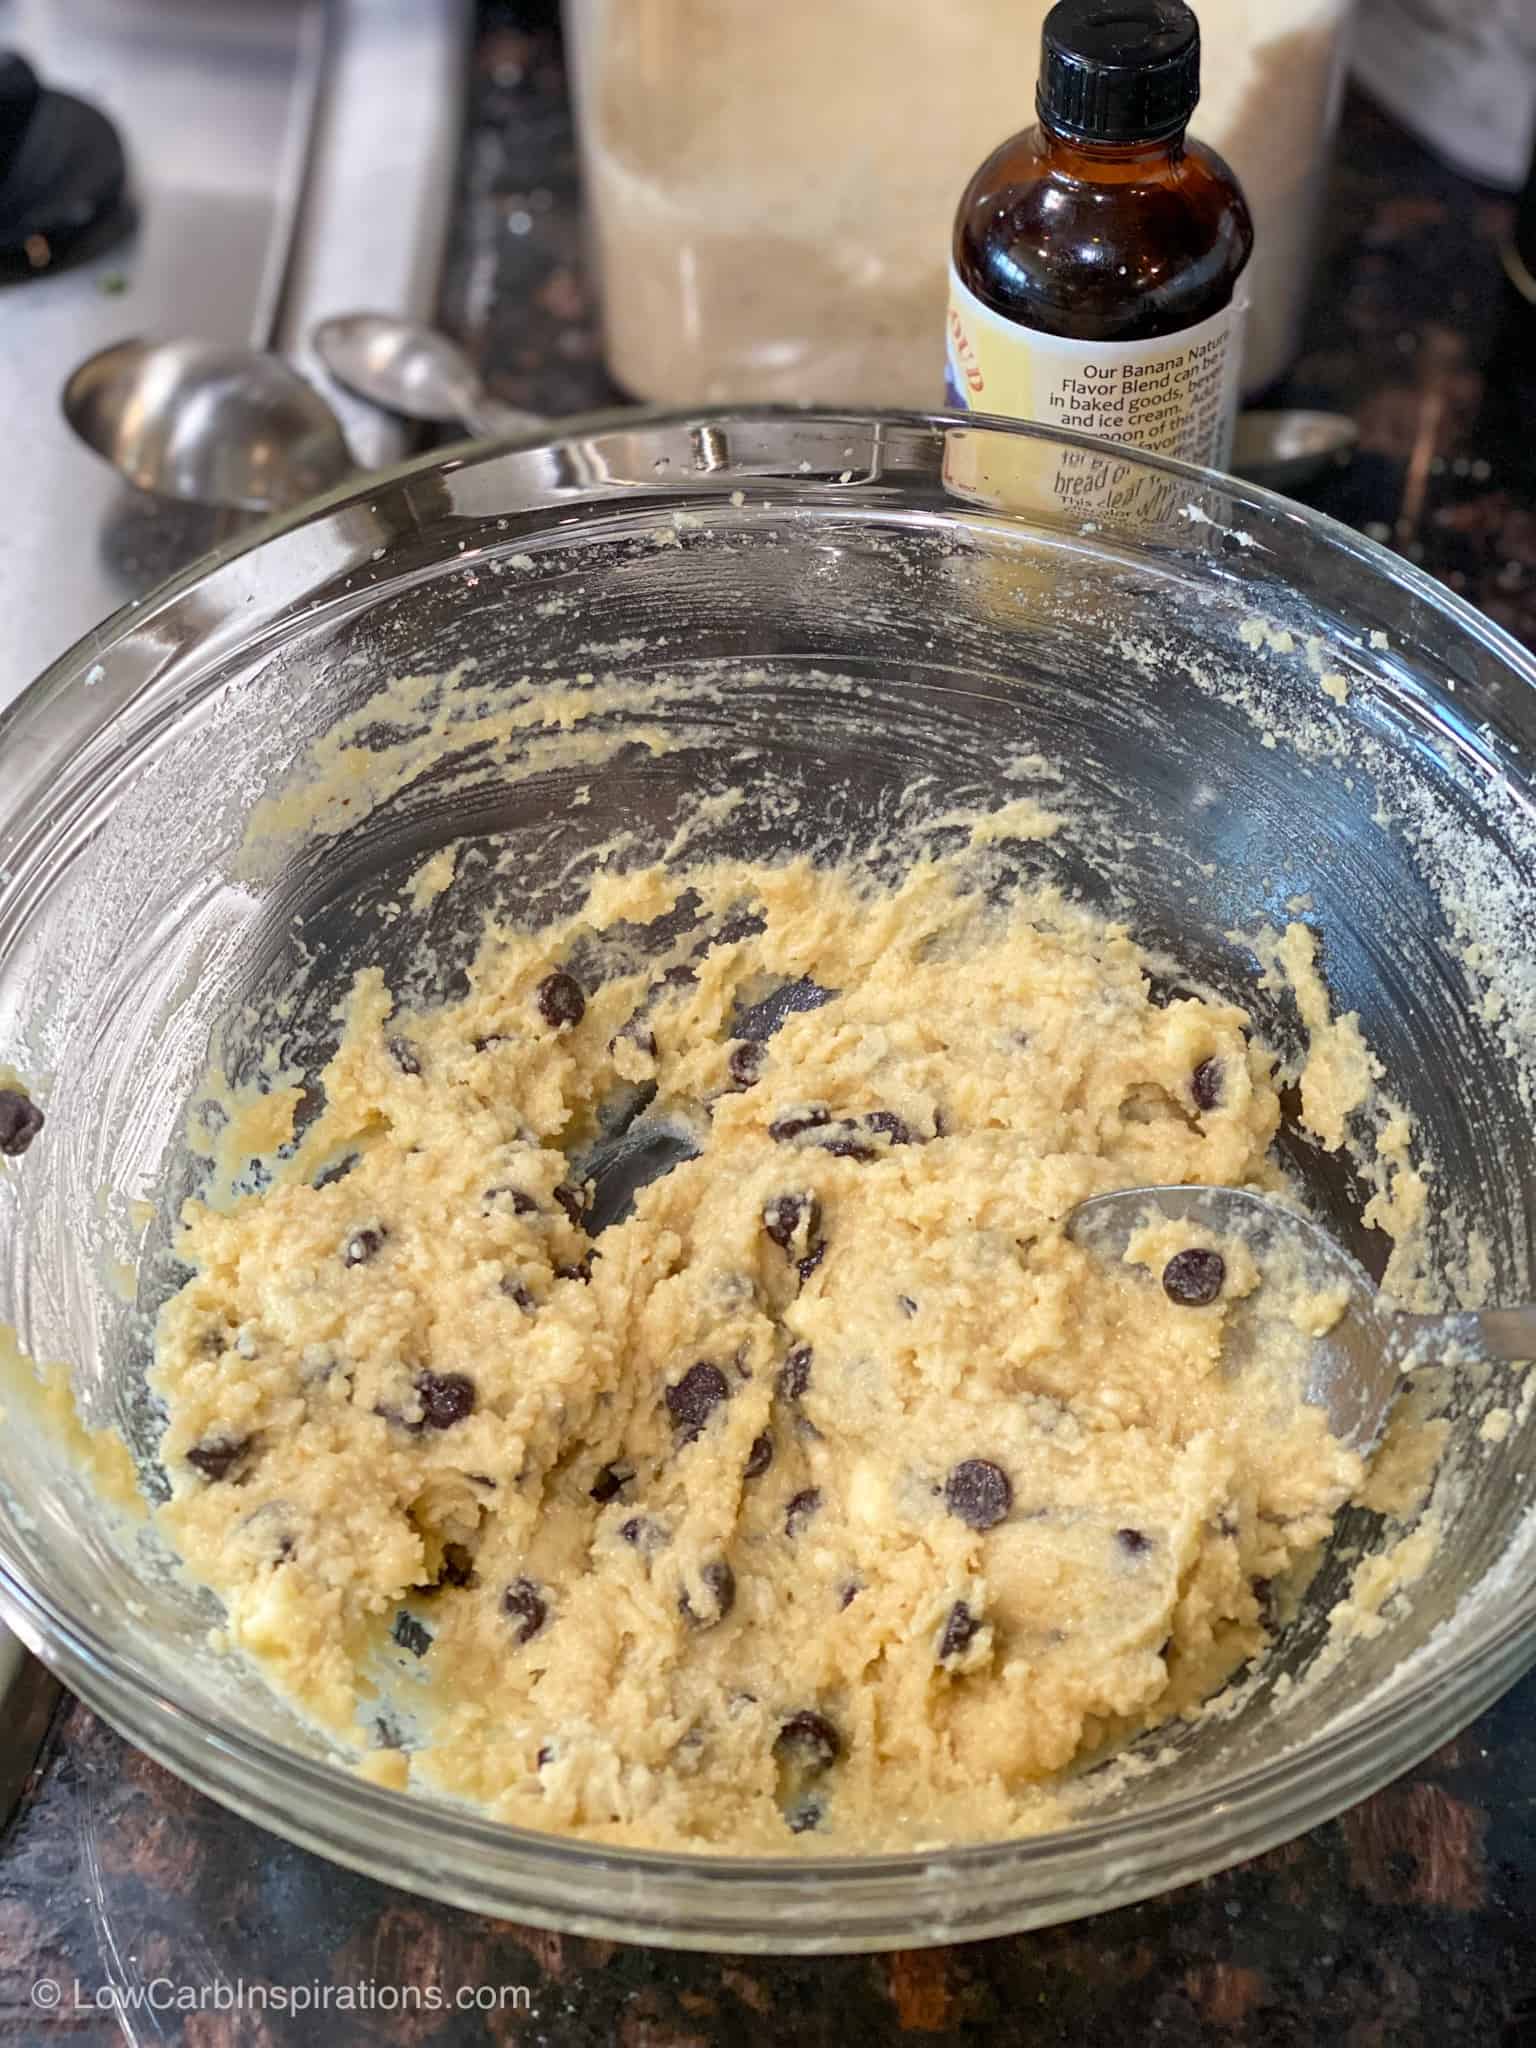 Batter for the Keto Chocolate Chip Banana Bread Recipe in a glass mixing bowl.